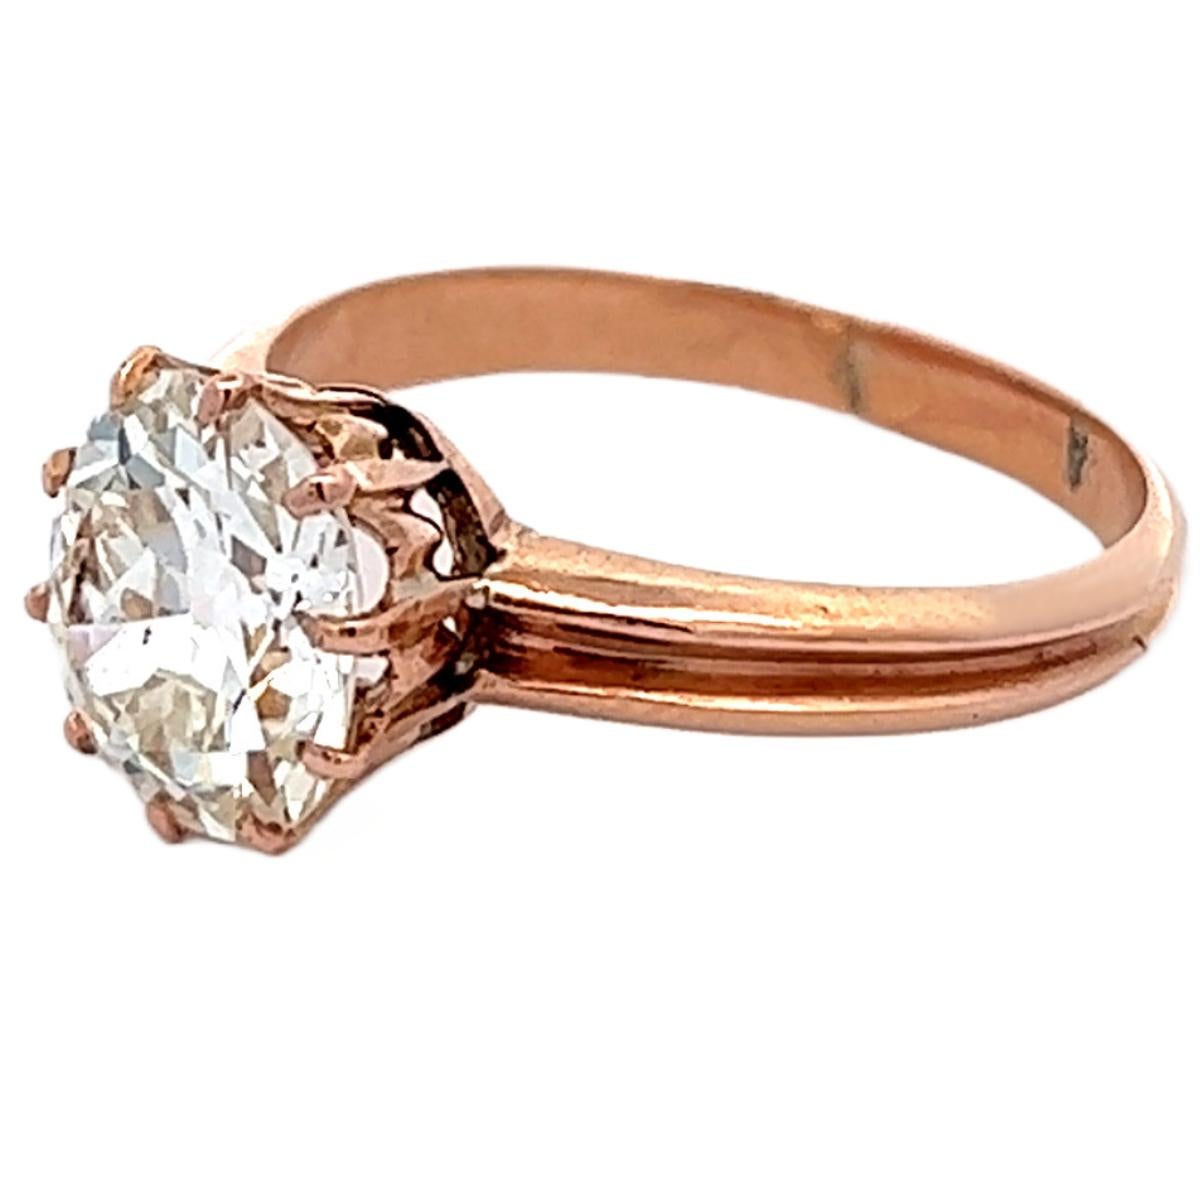 Victorian GIA 2.91 Carats Old Mine Cut Diamond 14k Rose Gold Solitaire Ring 1